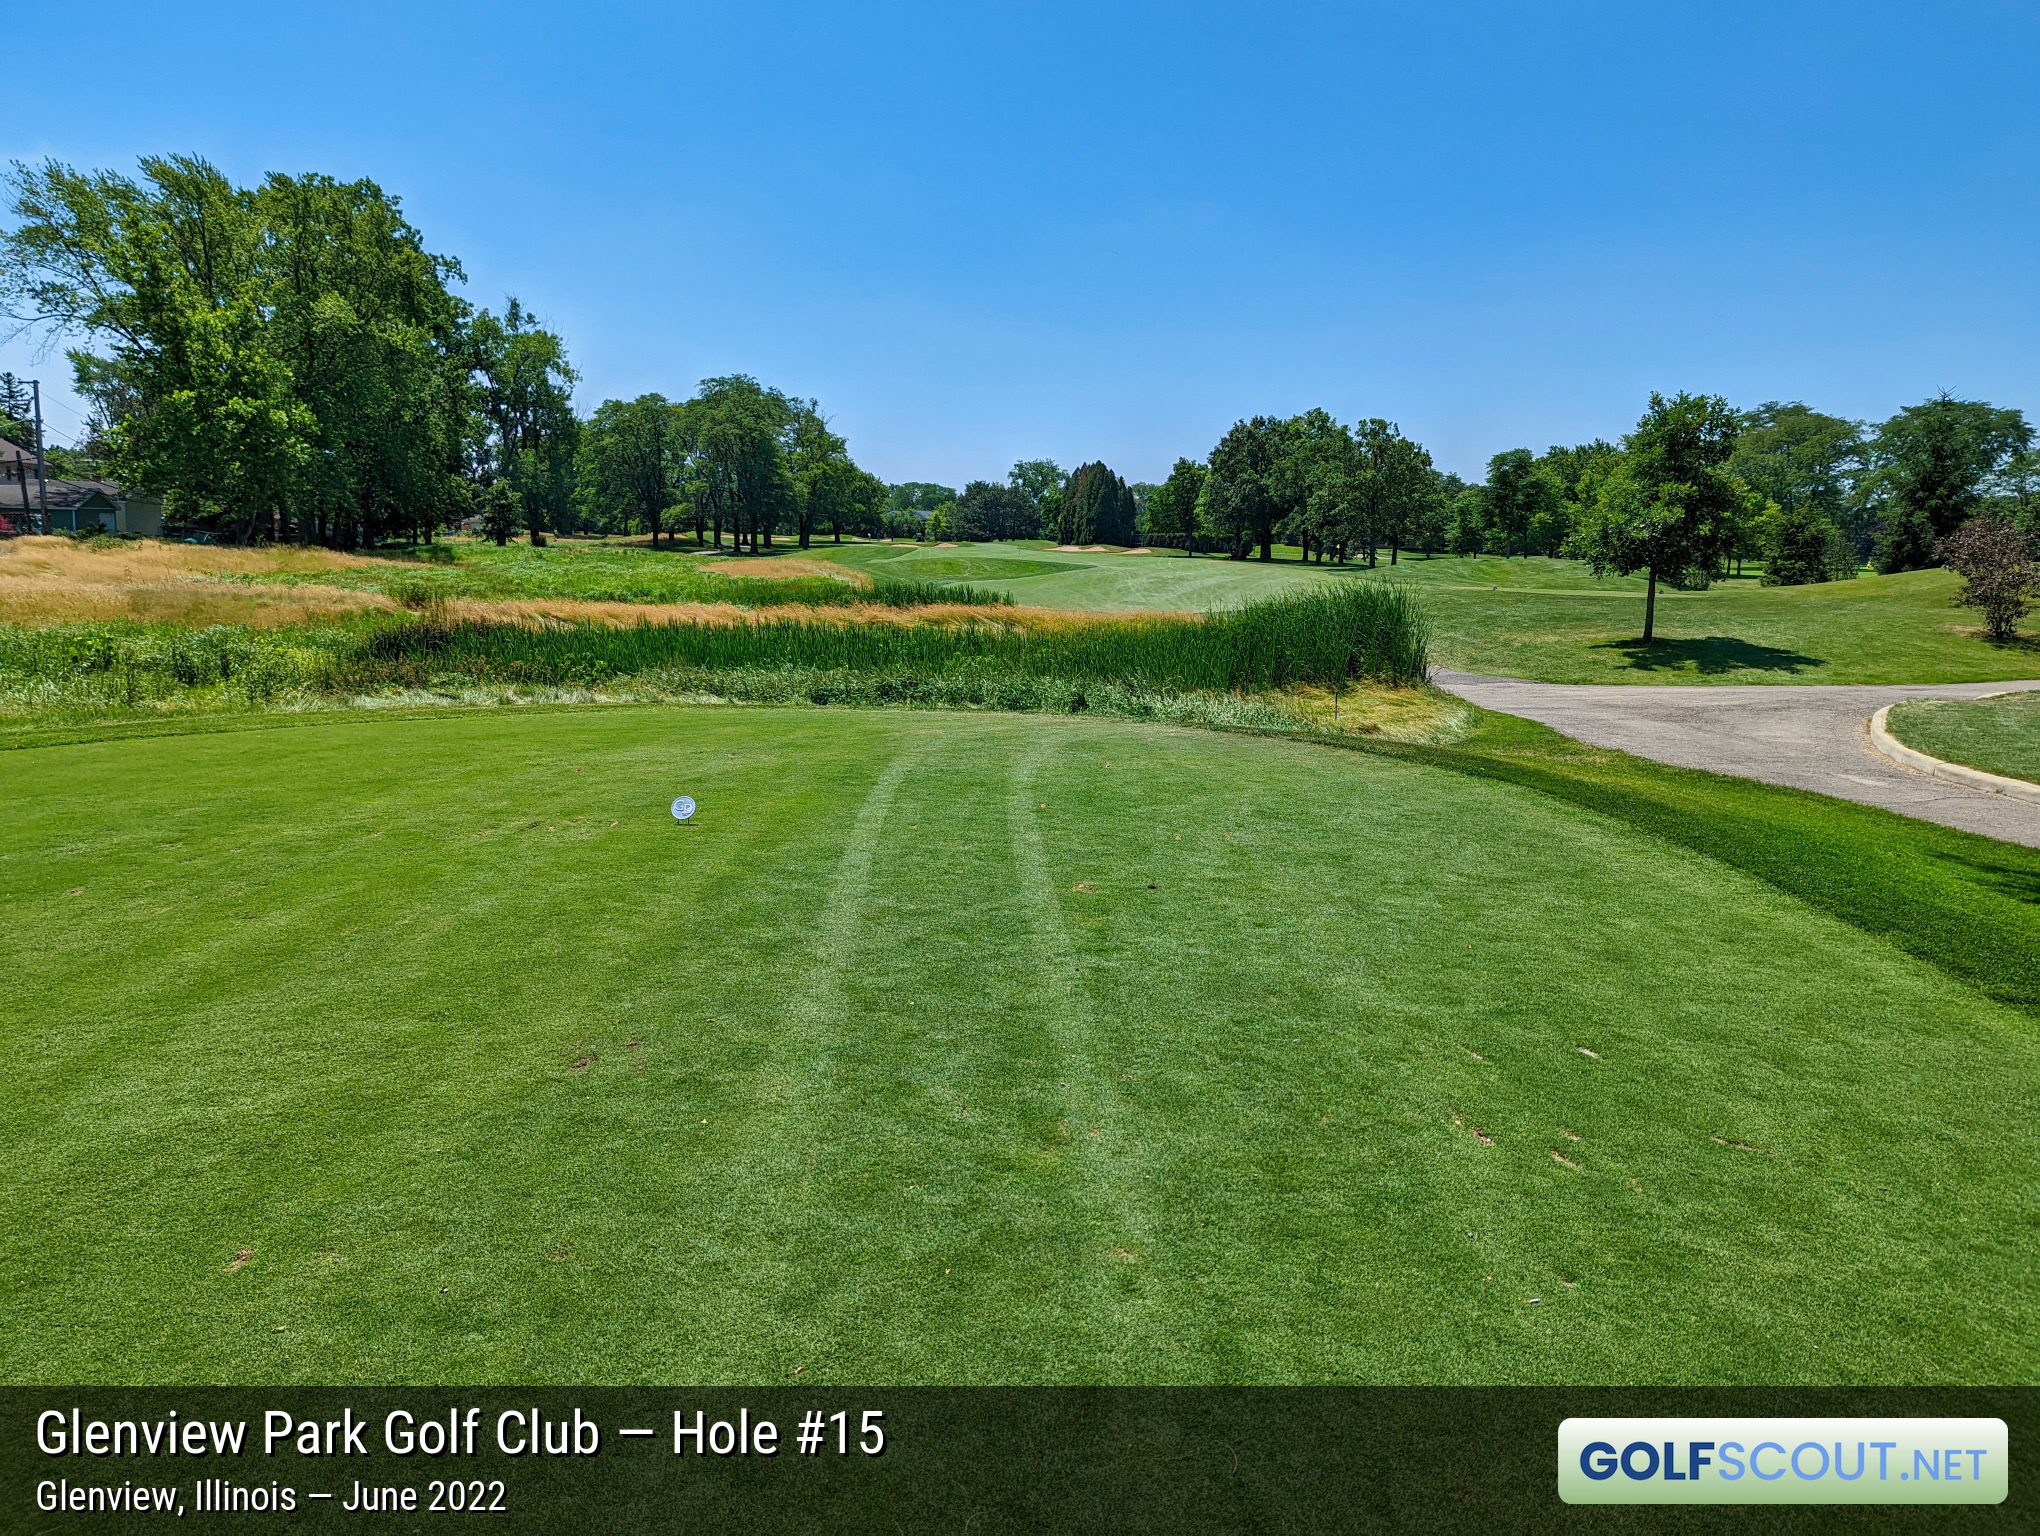 Photo of hole #15 at Glenview Park Golf Club in Glenview, Illinois. 